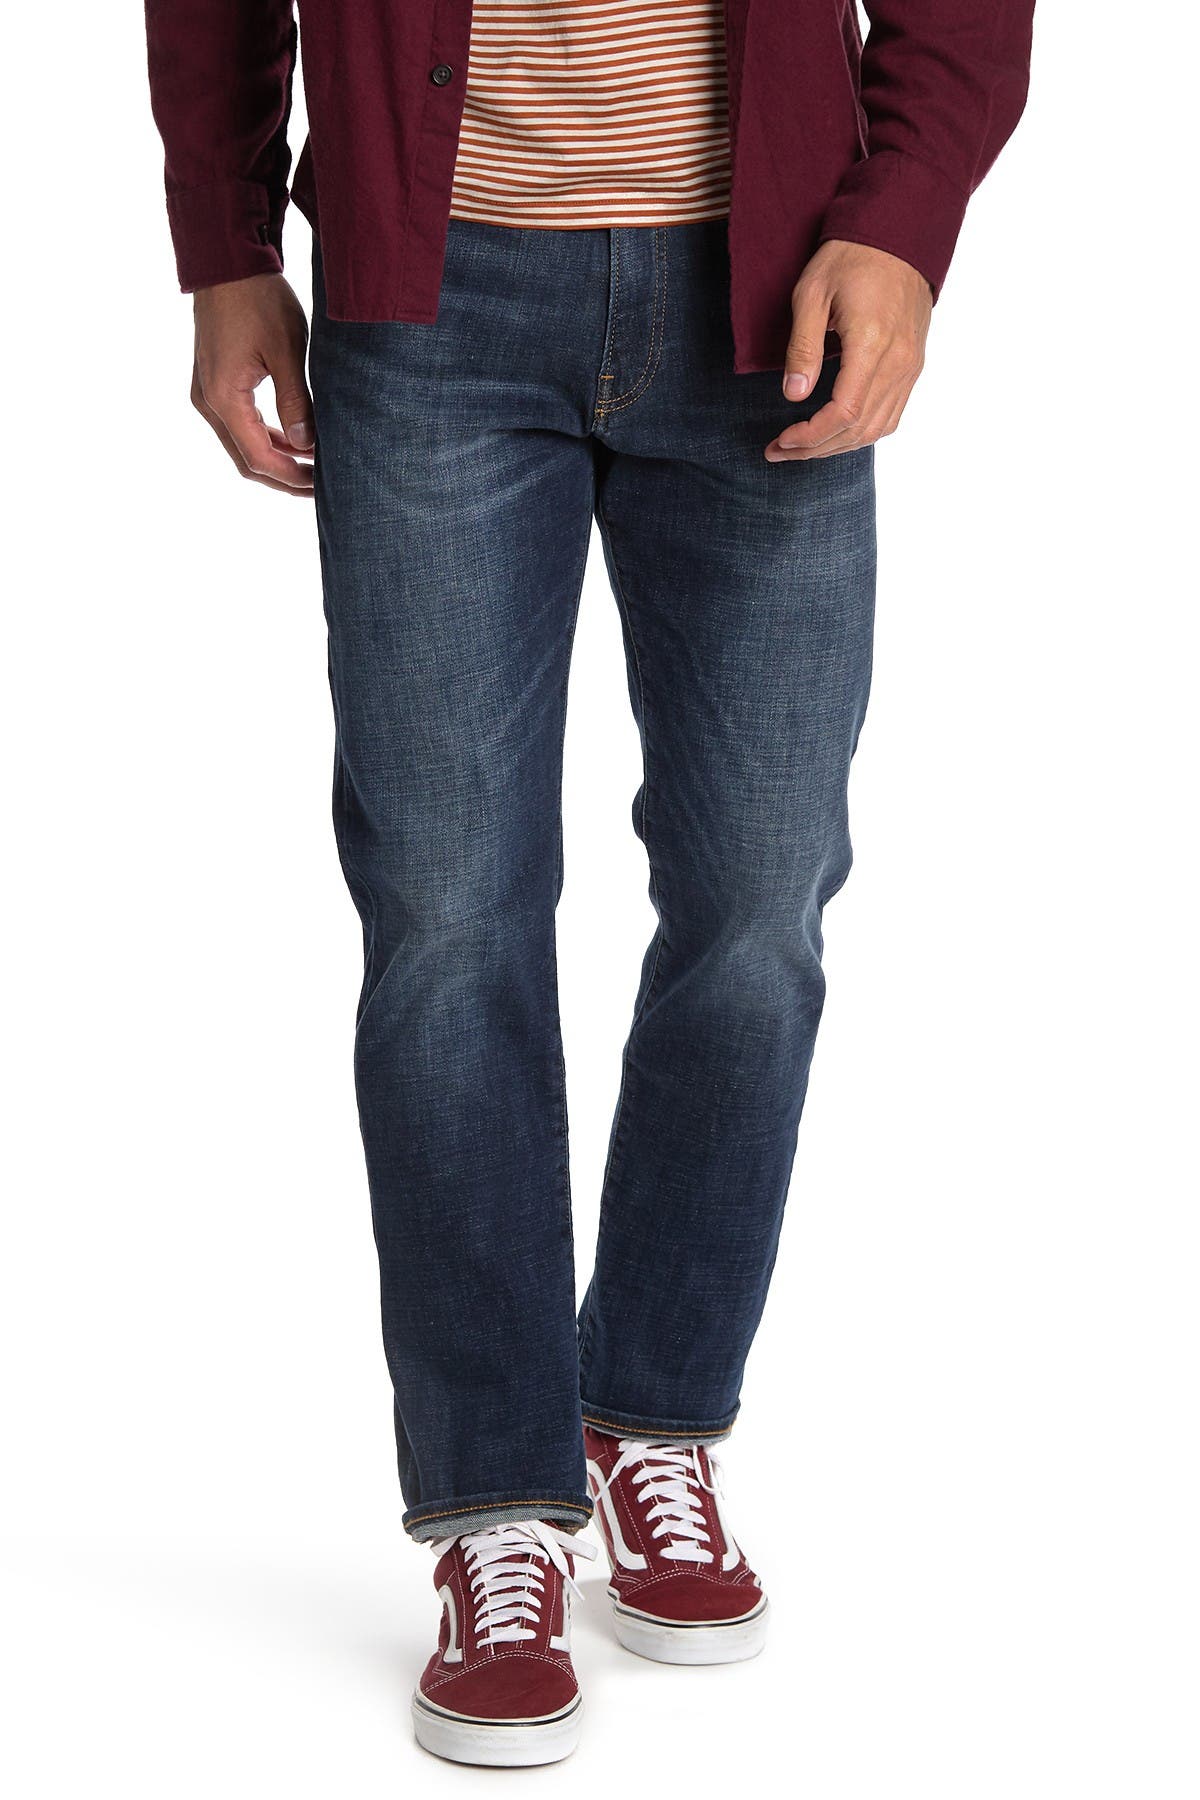 lucky brand skinny fit jeans